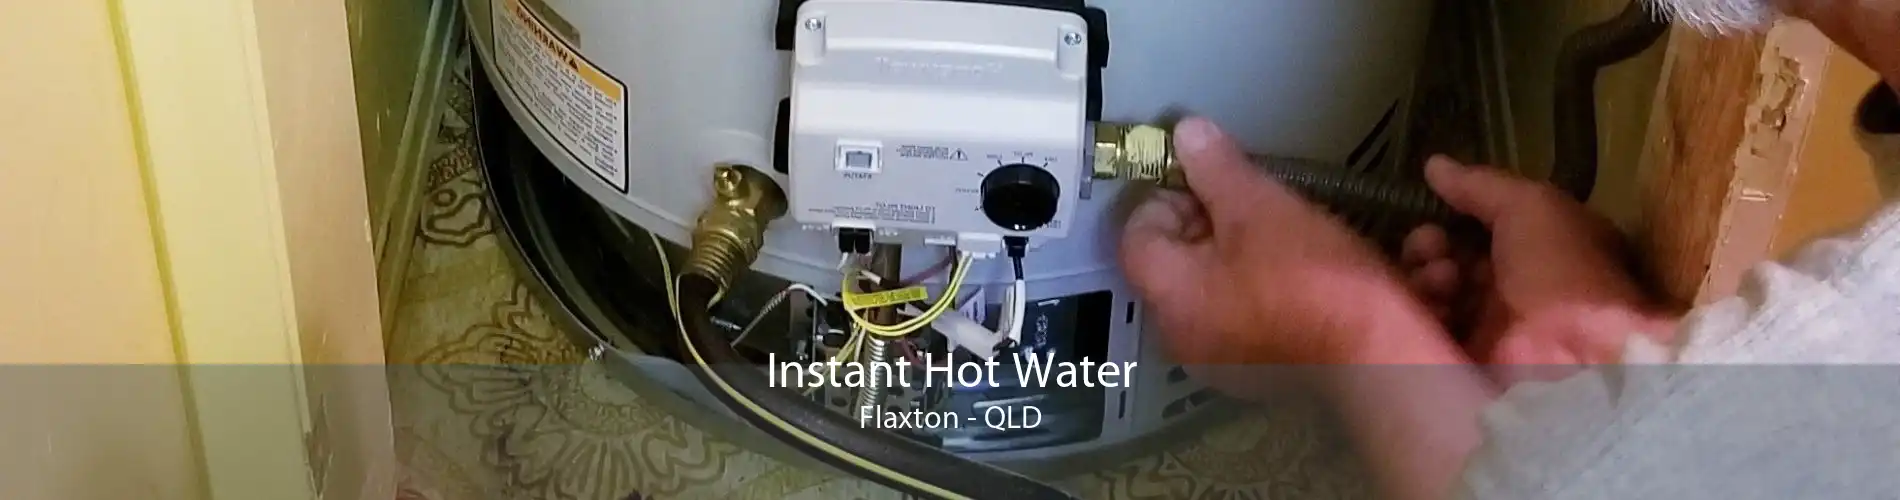 Instant Hot Water Flaxton - QLD